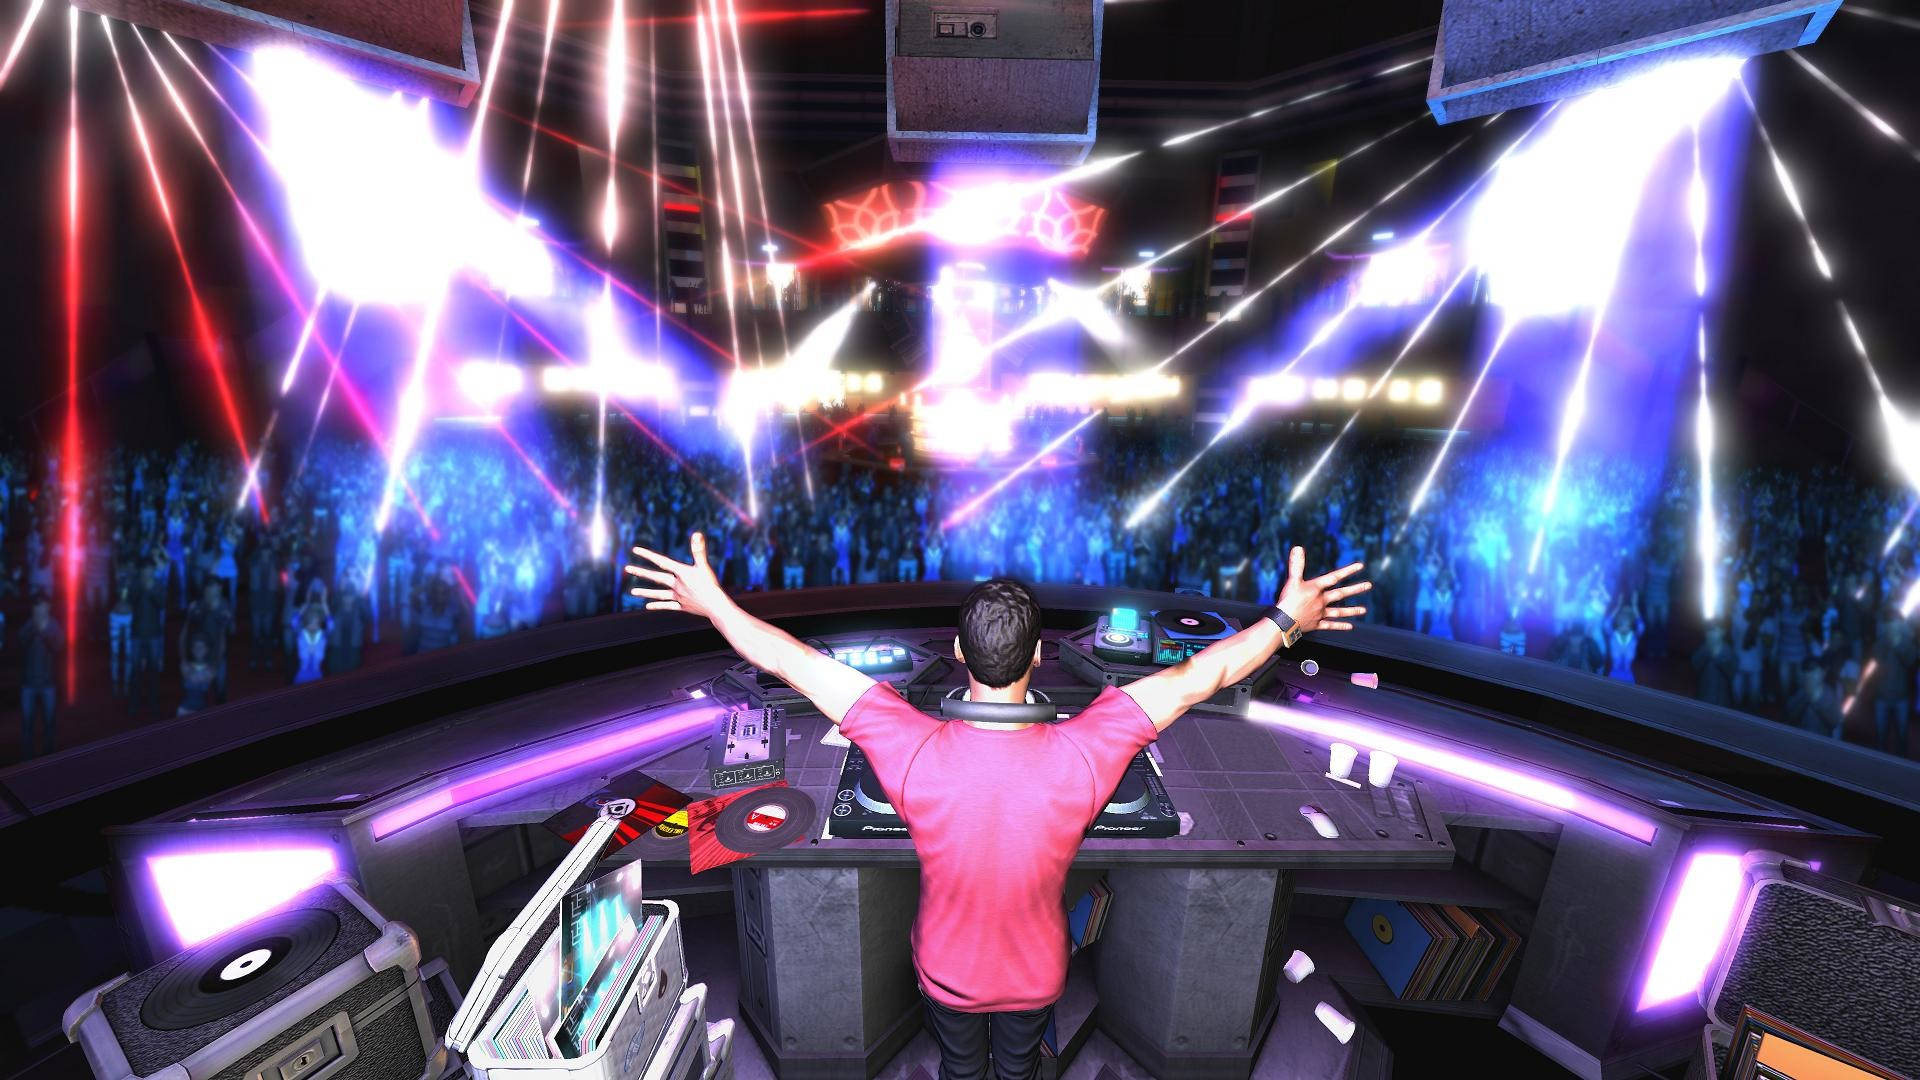 Caption: World Renowned Dj Tiesto In Action. Background